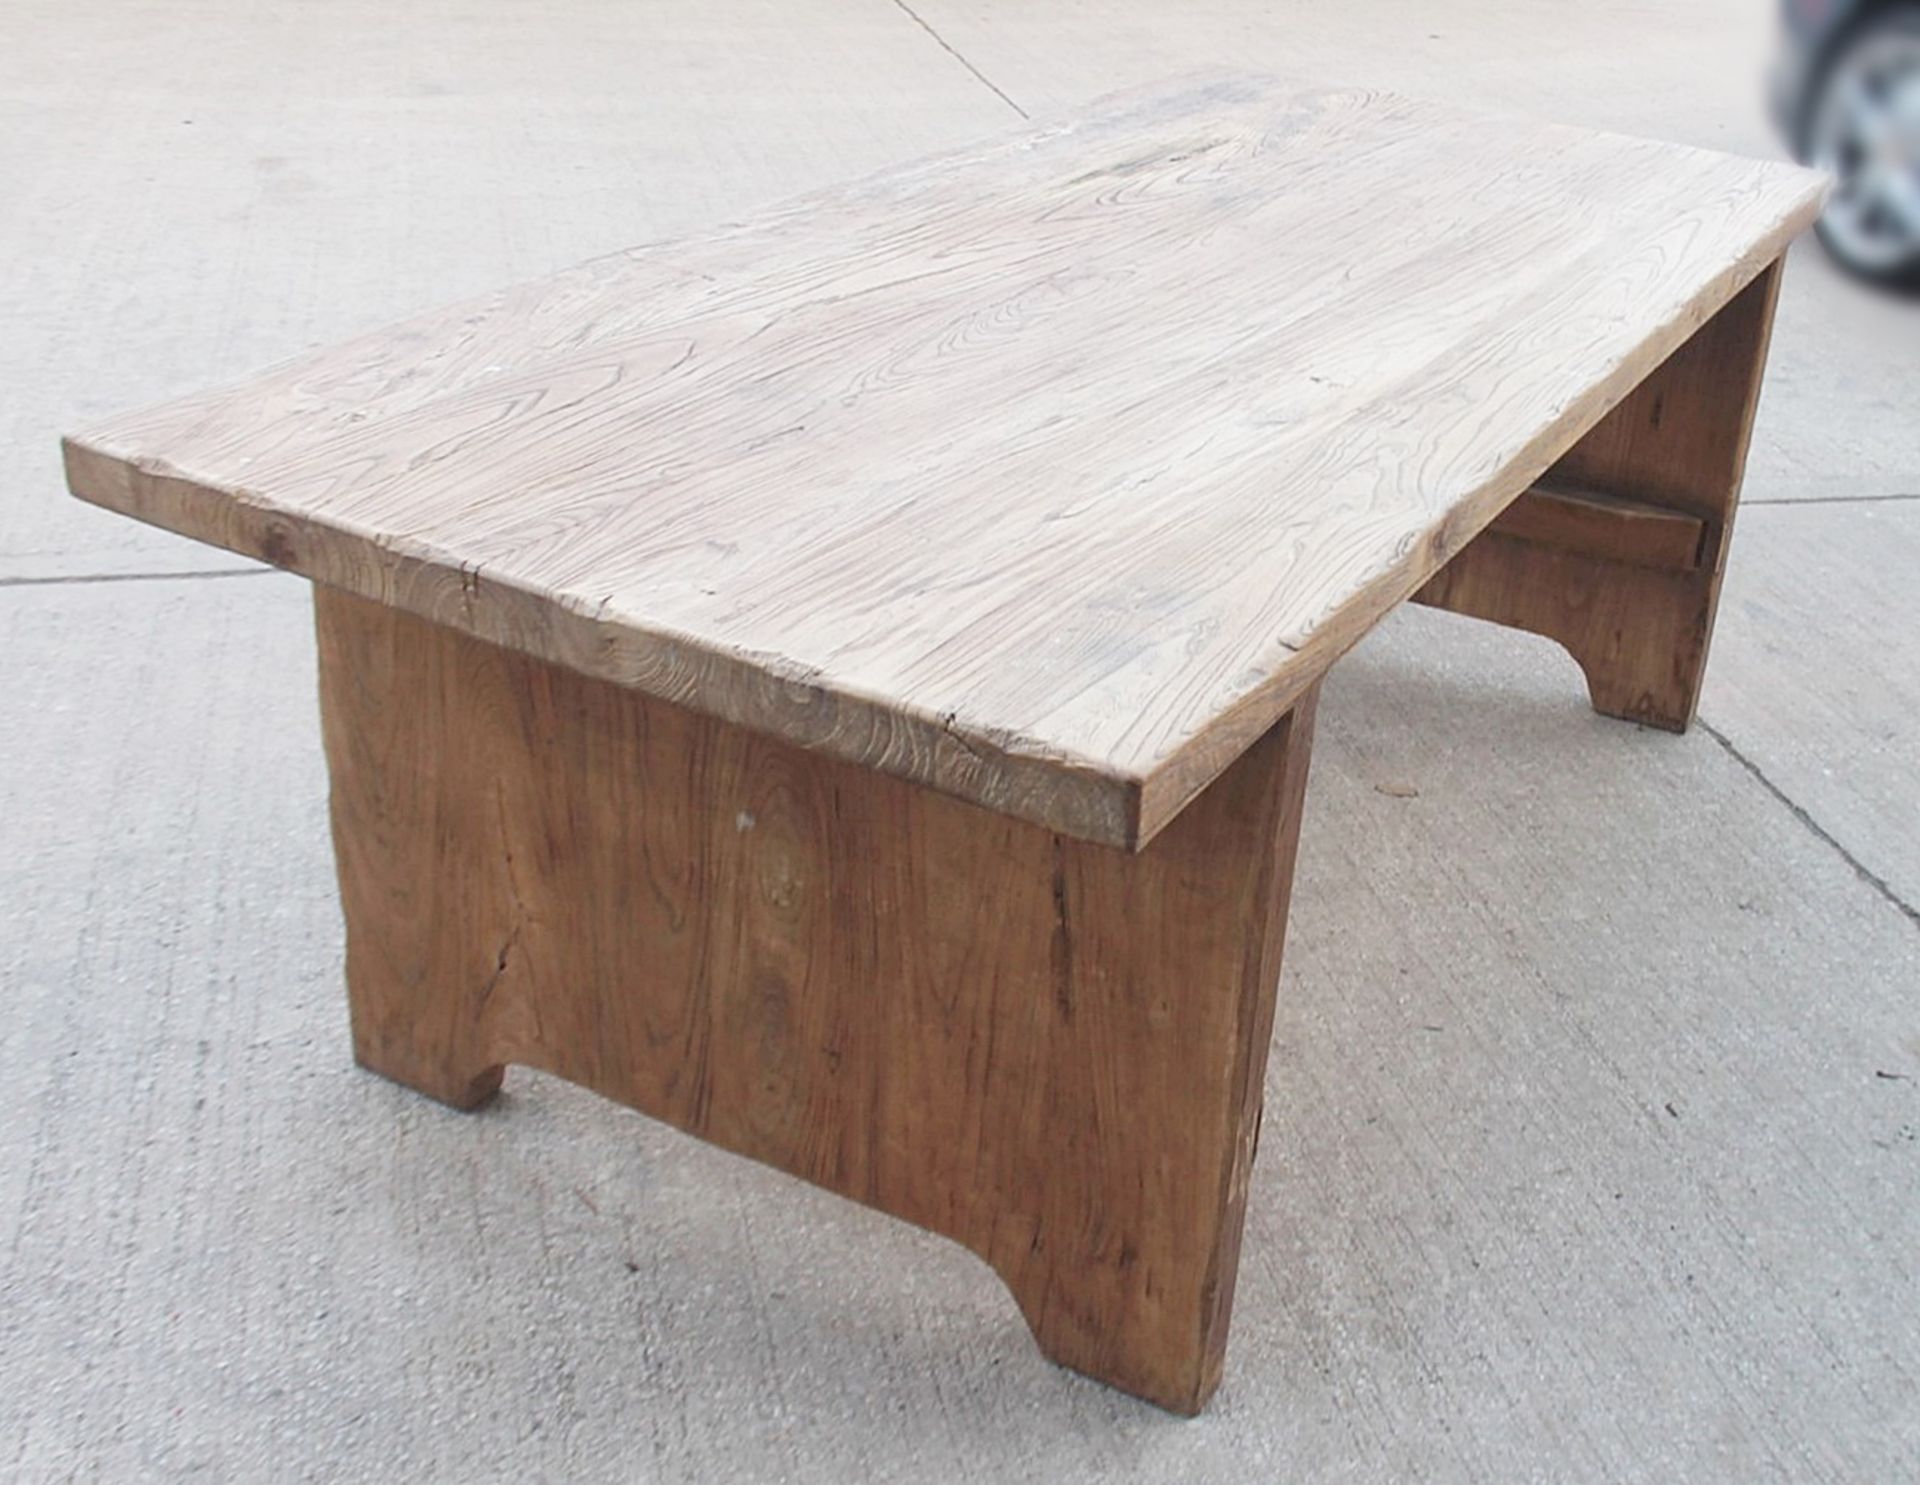 1 x Large 2-Metre Timber Desk - Recently Relocated From An Exclusive Property - Ref: GEN1143 - - Image 2 of 7